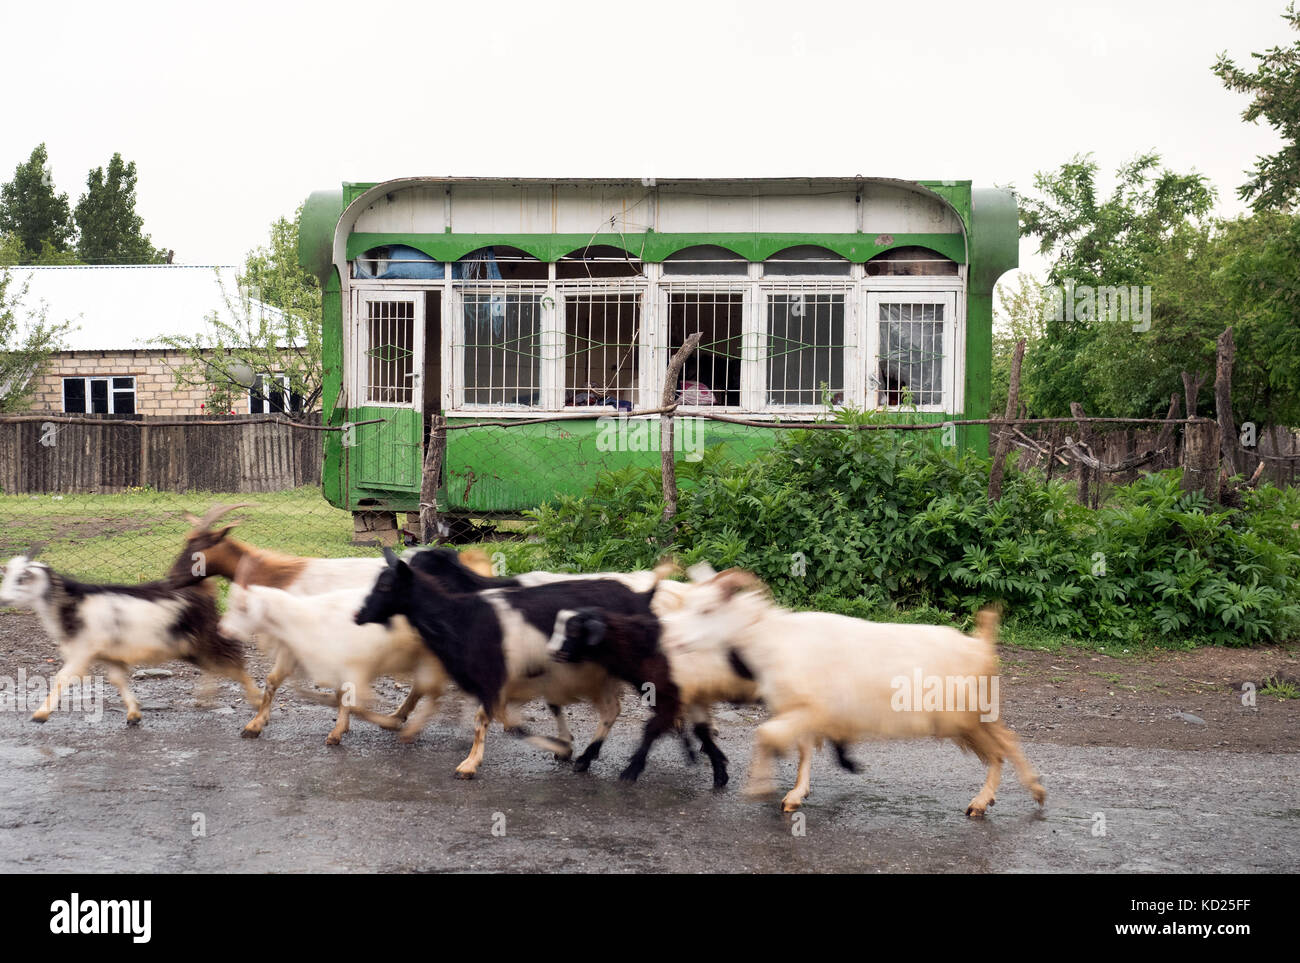 Flock of goats running along a rural road in a remote village of northern Azerbaijan Stock Photo